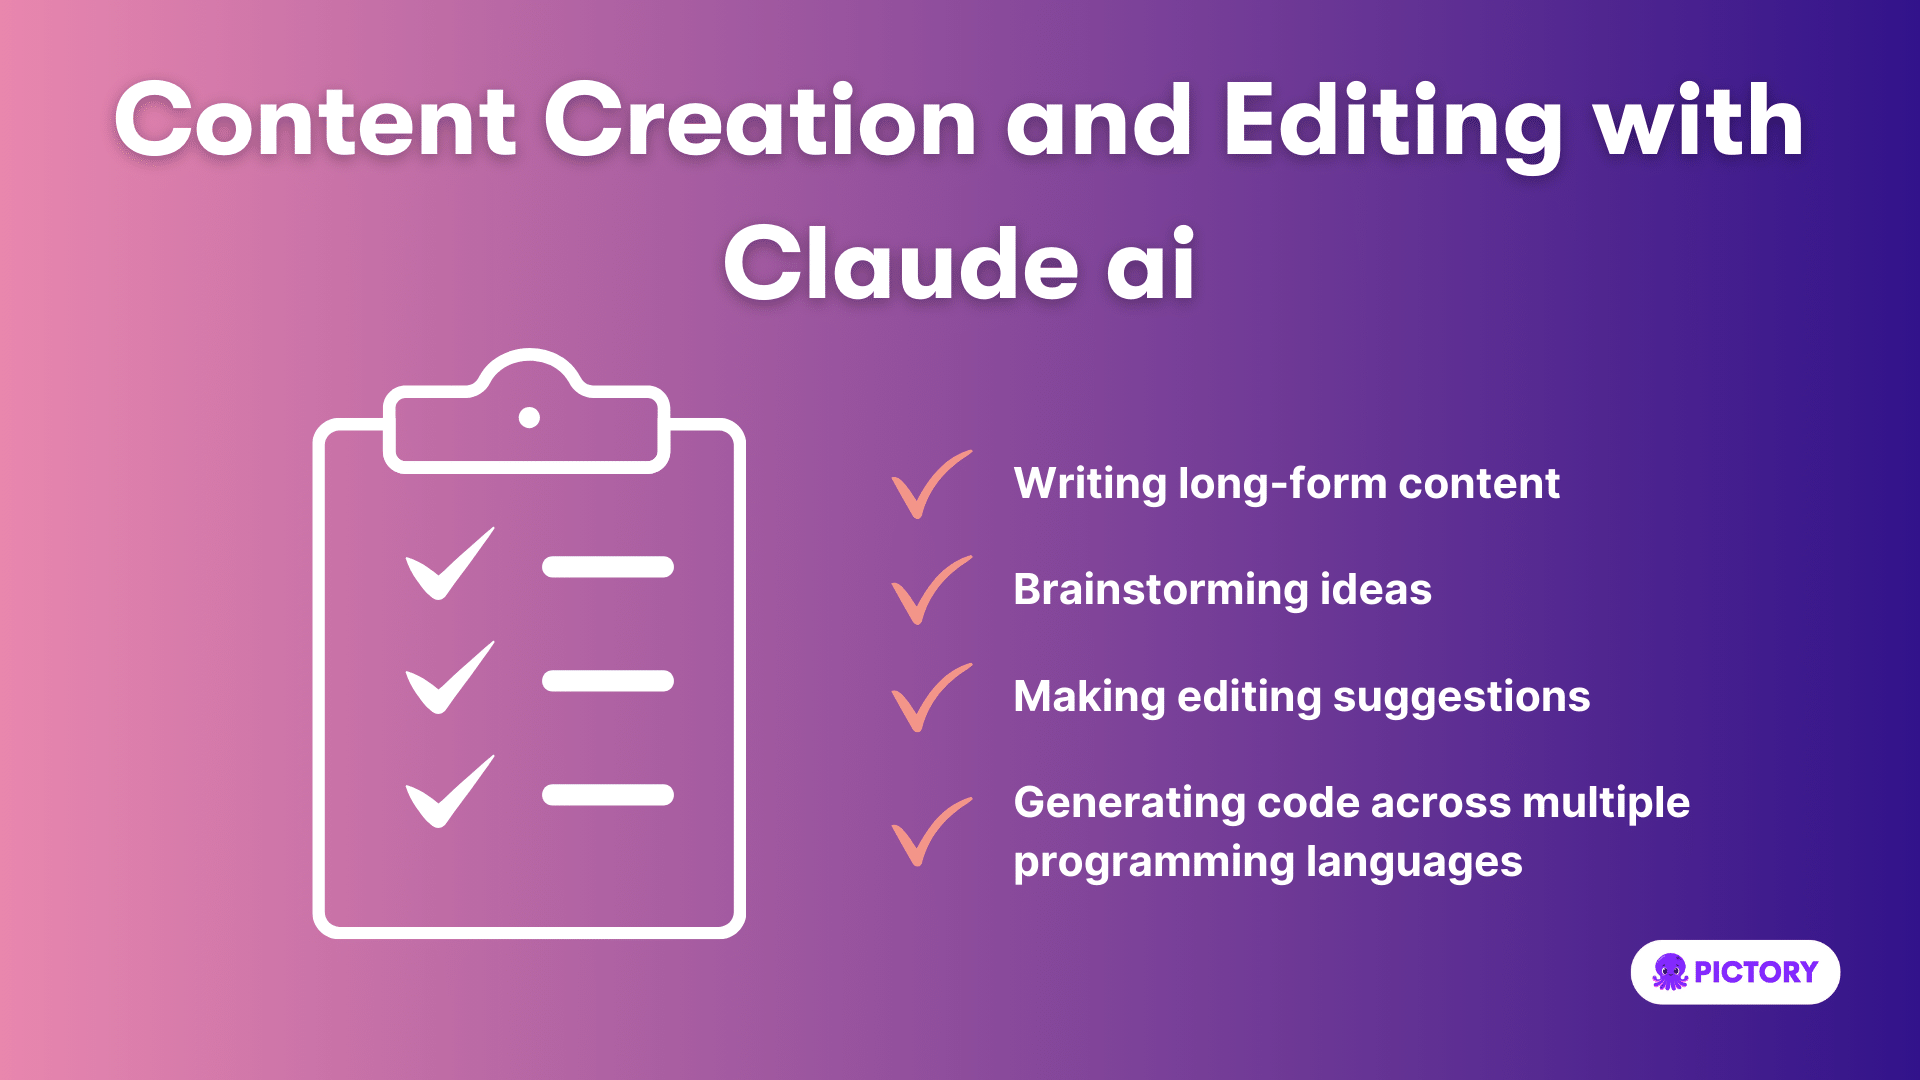 Content Creation and Editing with claude ai checklist